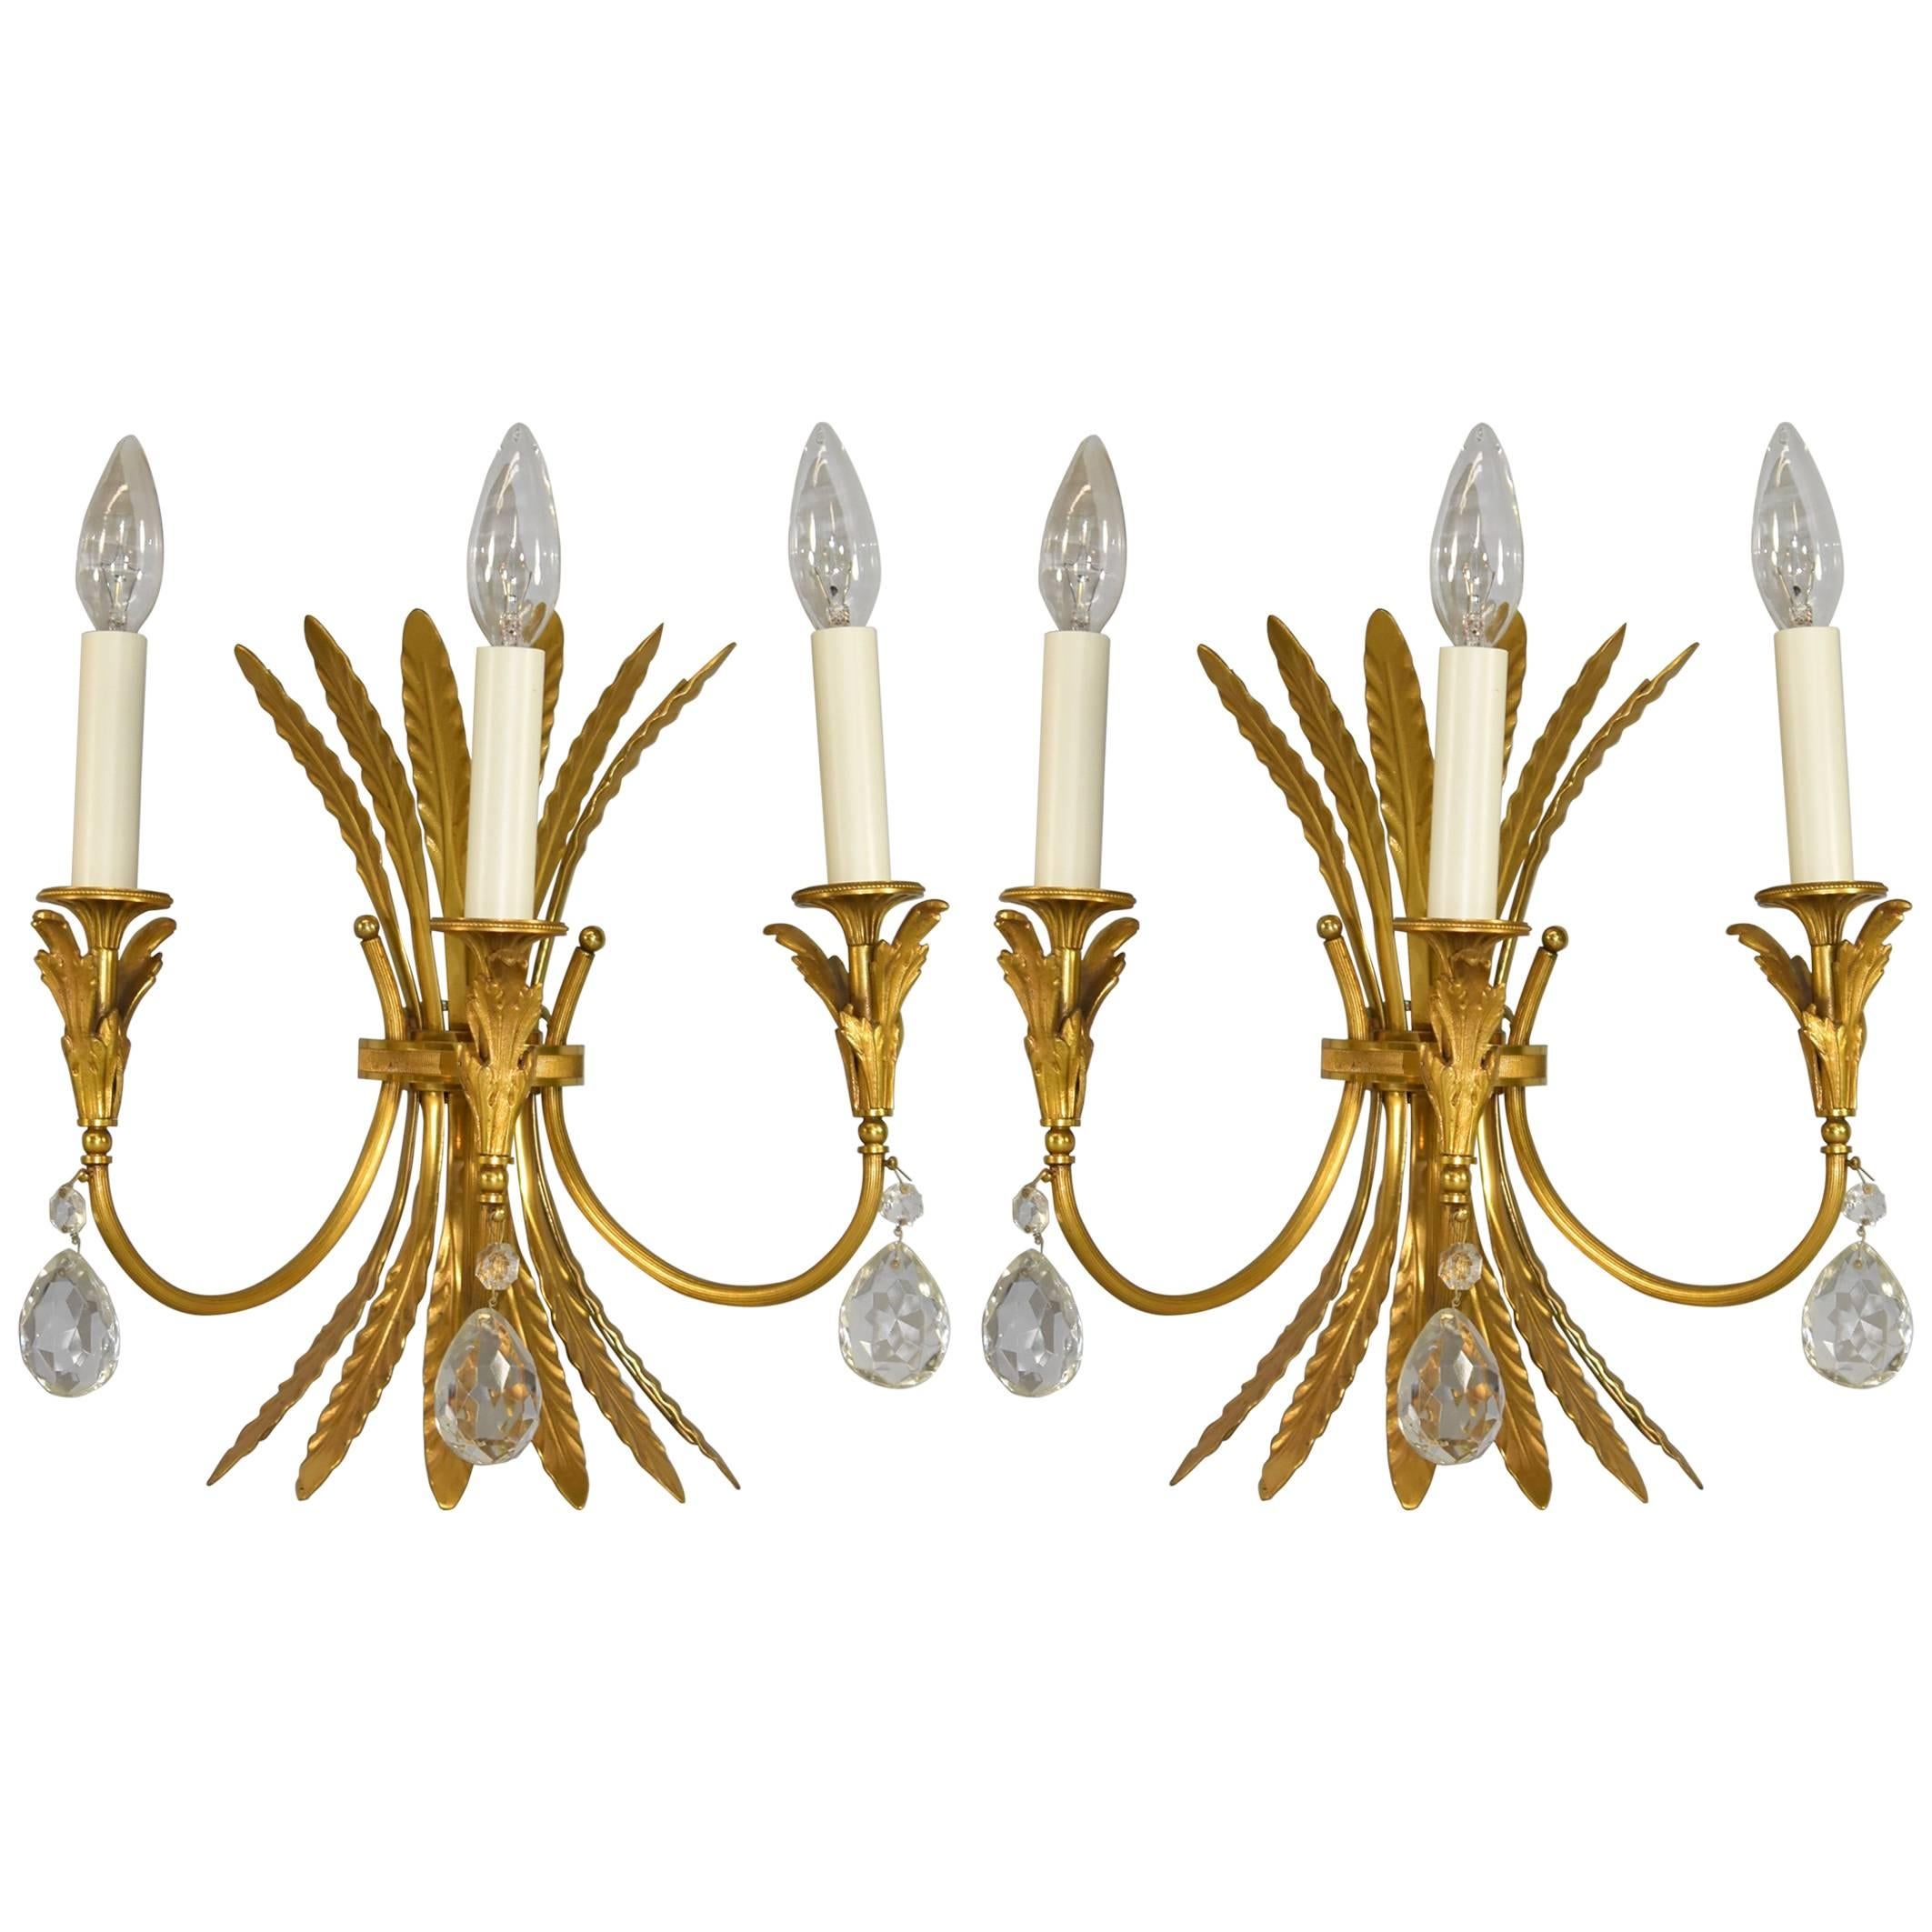 Pair of Italian Neoclassic Style Three-Arm Brass Wall Sconces